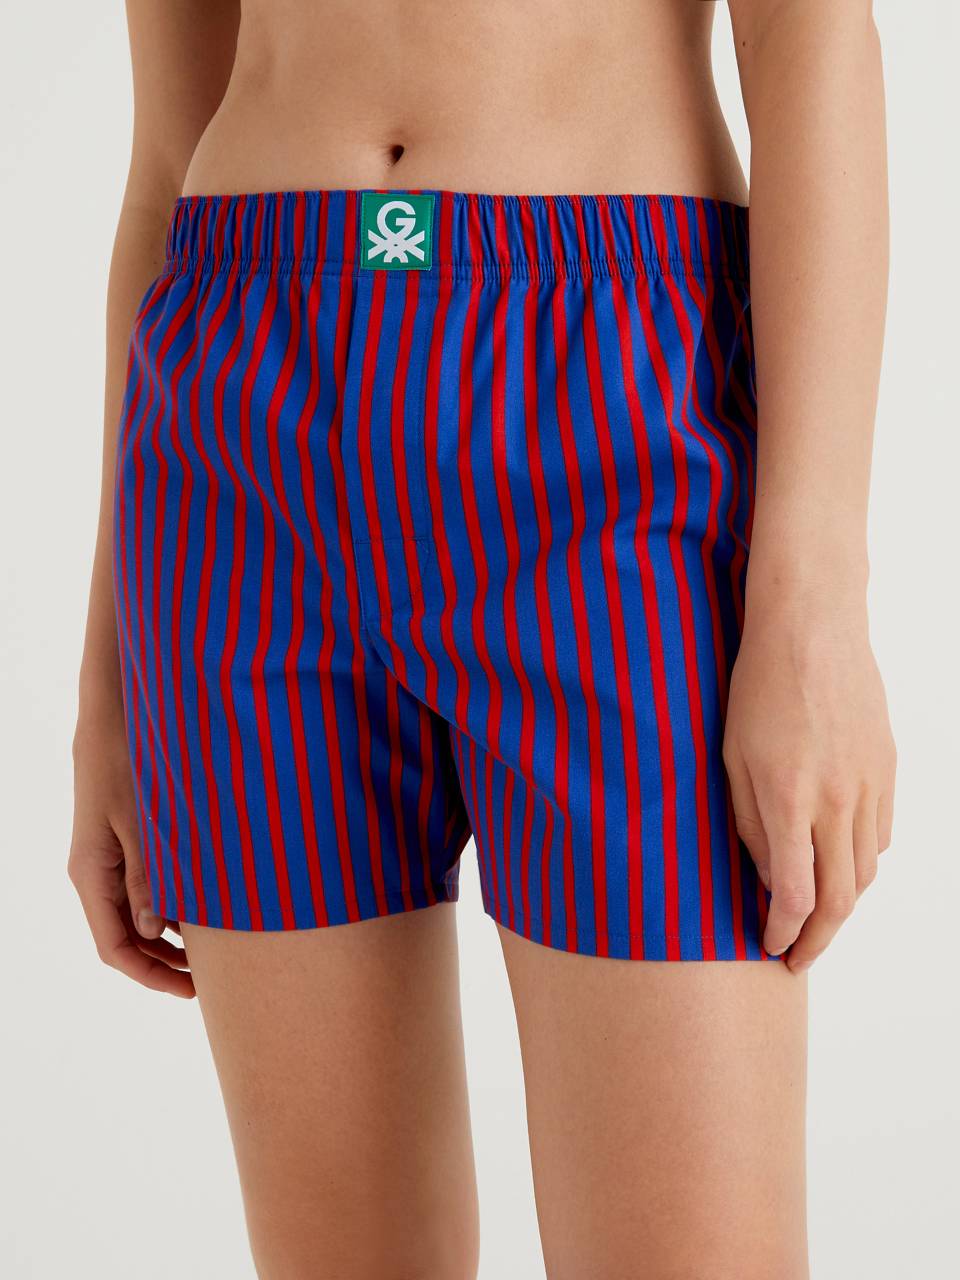 Benetton Striped boxers by Ghali. 1